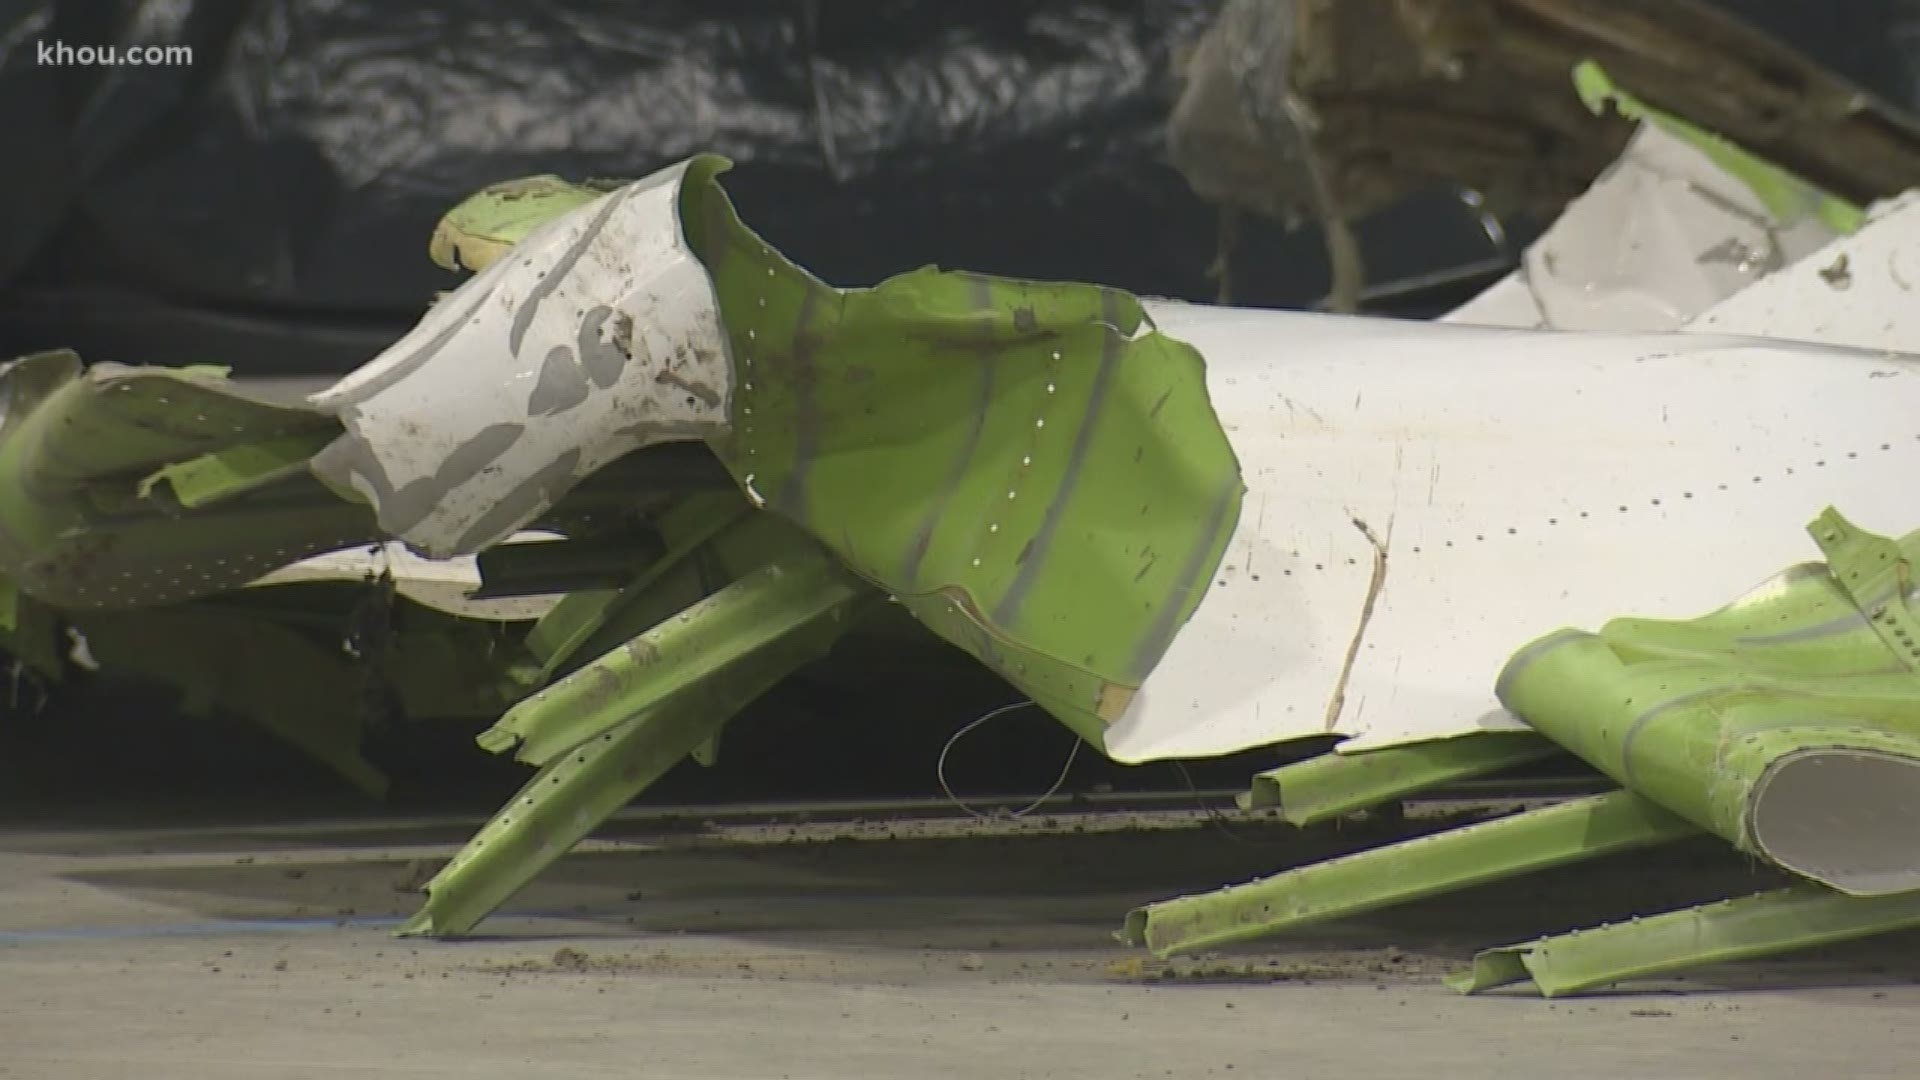 KHOU 11 News was given a first-time look at the Amazon cargo plane crash wreckage and debris collected from the Trinity Bay.